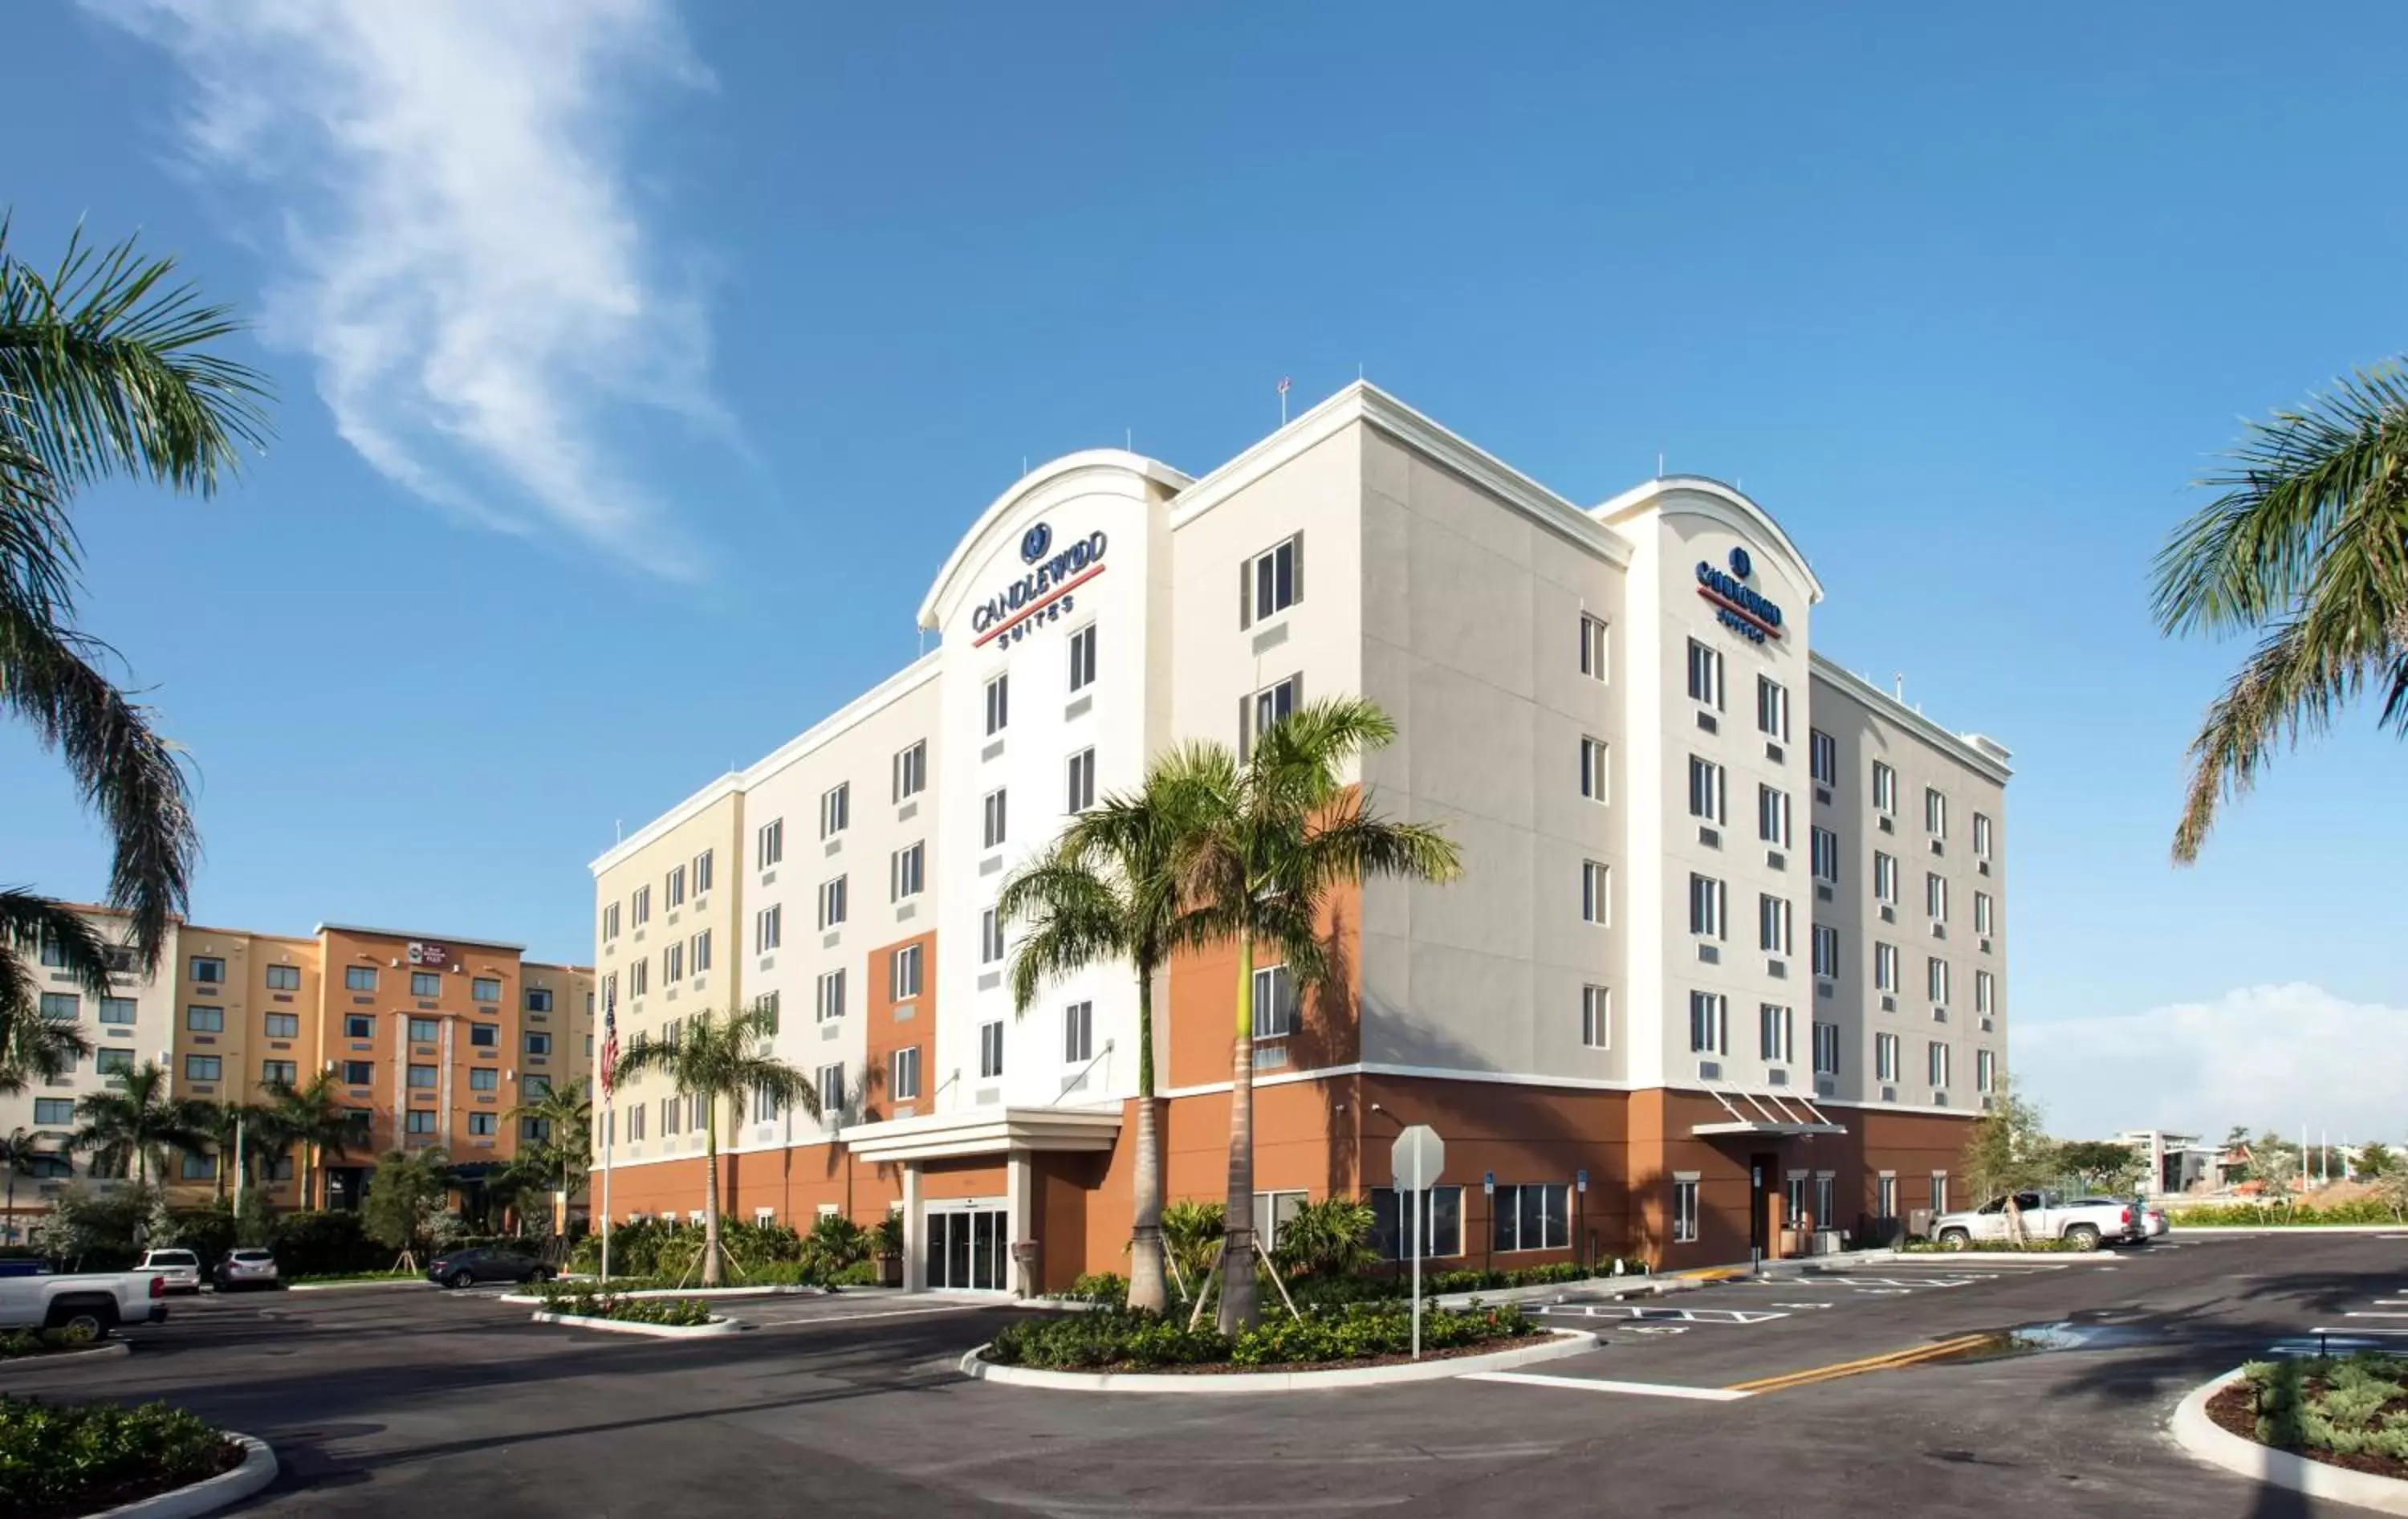 Property building in Candlewood Suites - Miami Exec Airport - Kendall, an IHG Hotel